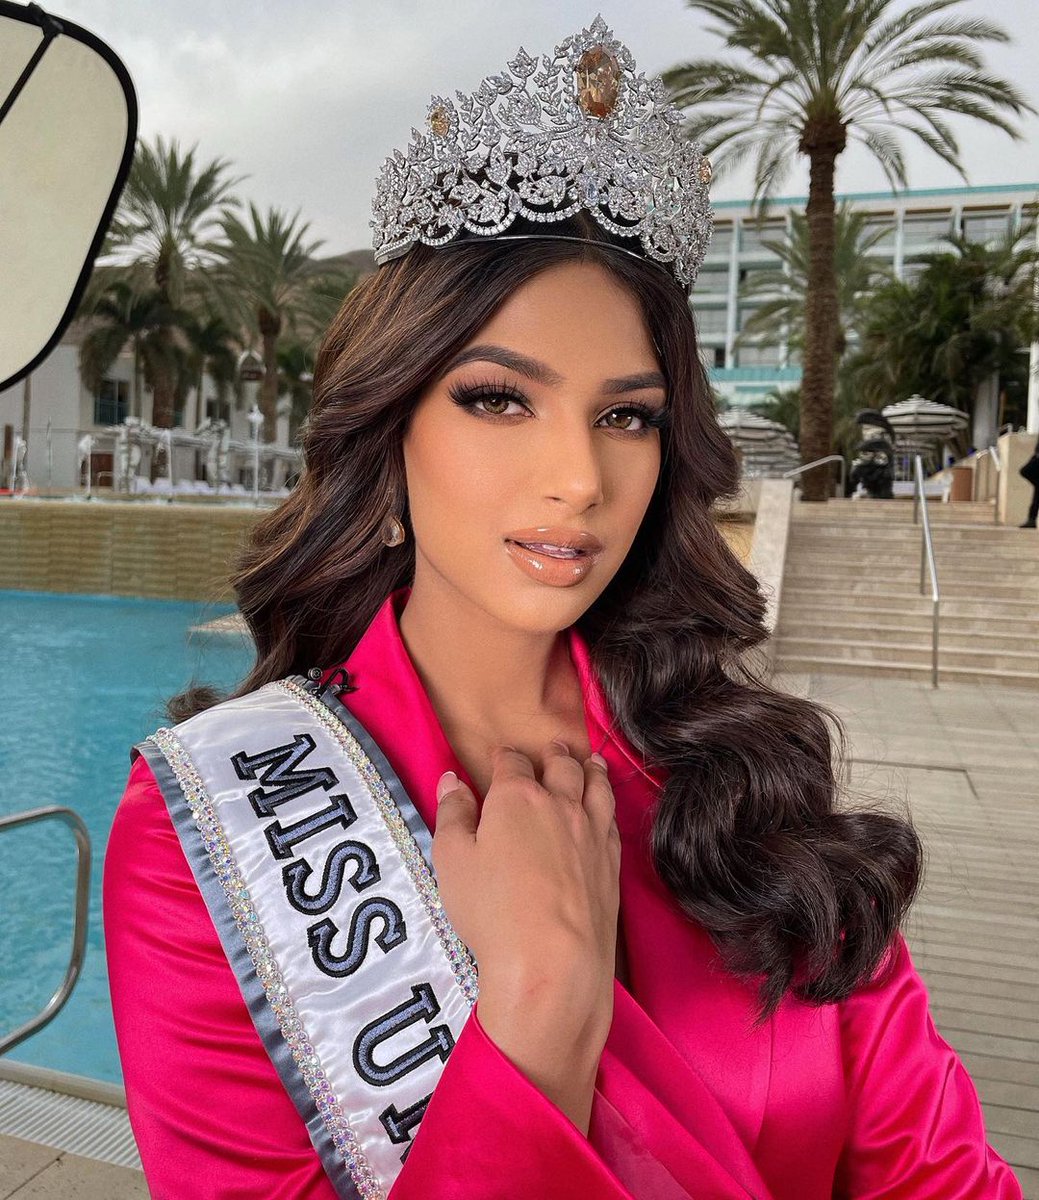 𝗟𝗢𝗢𝗞 | Newly crowned queen Harnaaz Sandhu is ready for her first day as #MissUniverse 2021!

Makeup: @andresfelipeofficial @mubacosmetics 
Hair: @bryannbonilla

#70thMissUniverse #MissUniverse2021 #MissUniverso #MissosologyBig5 #PageantsThatMatter #RelevantPageants https://t.co/M8yHASYeiq.